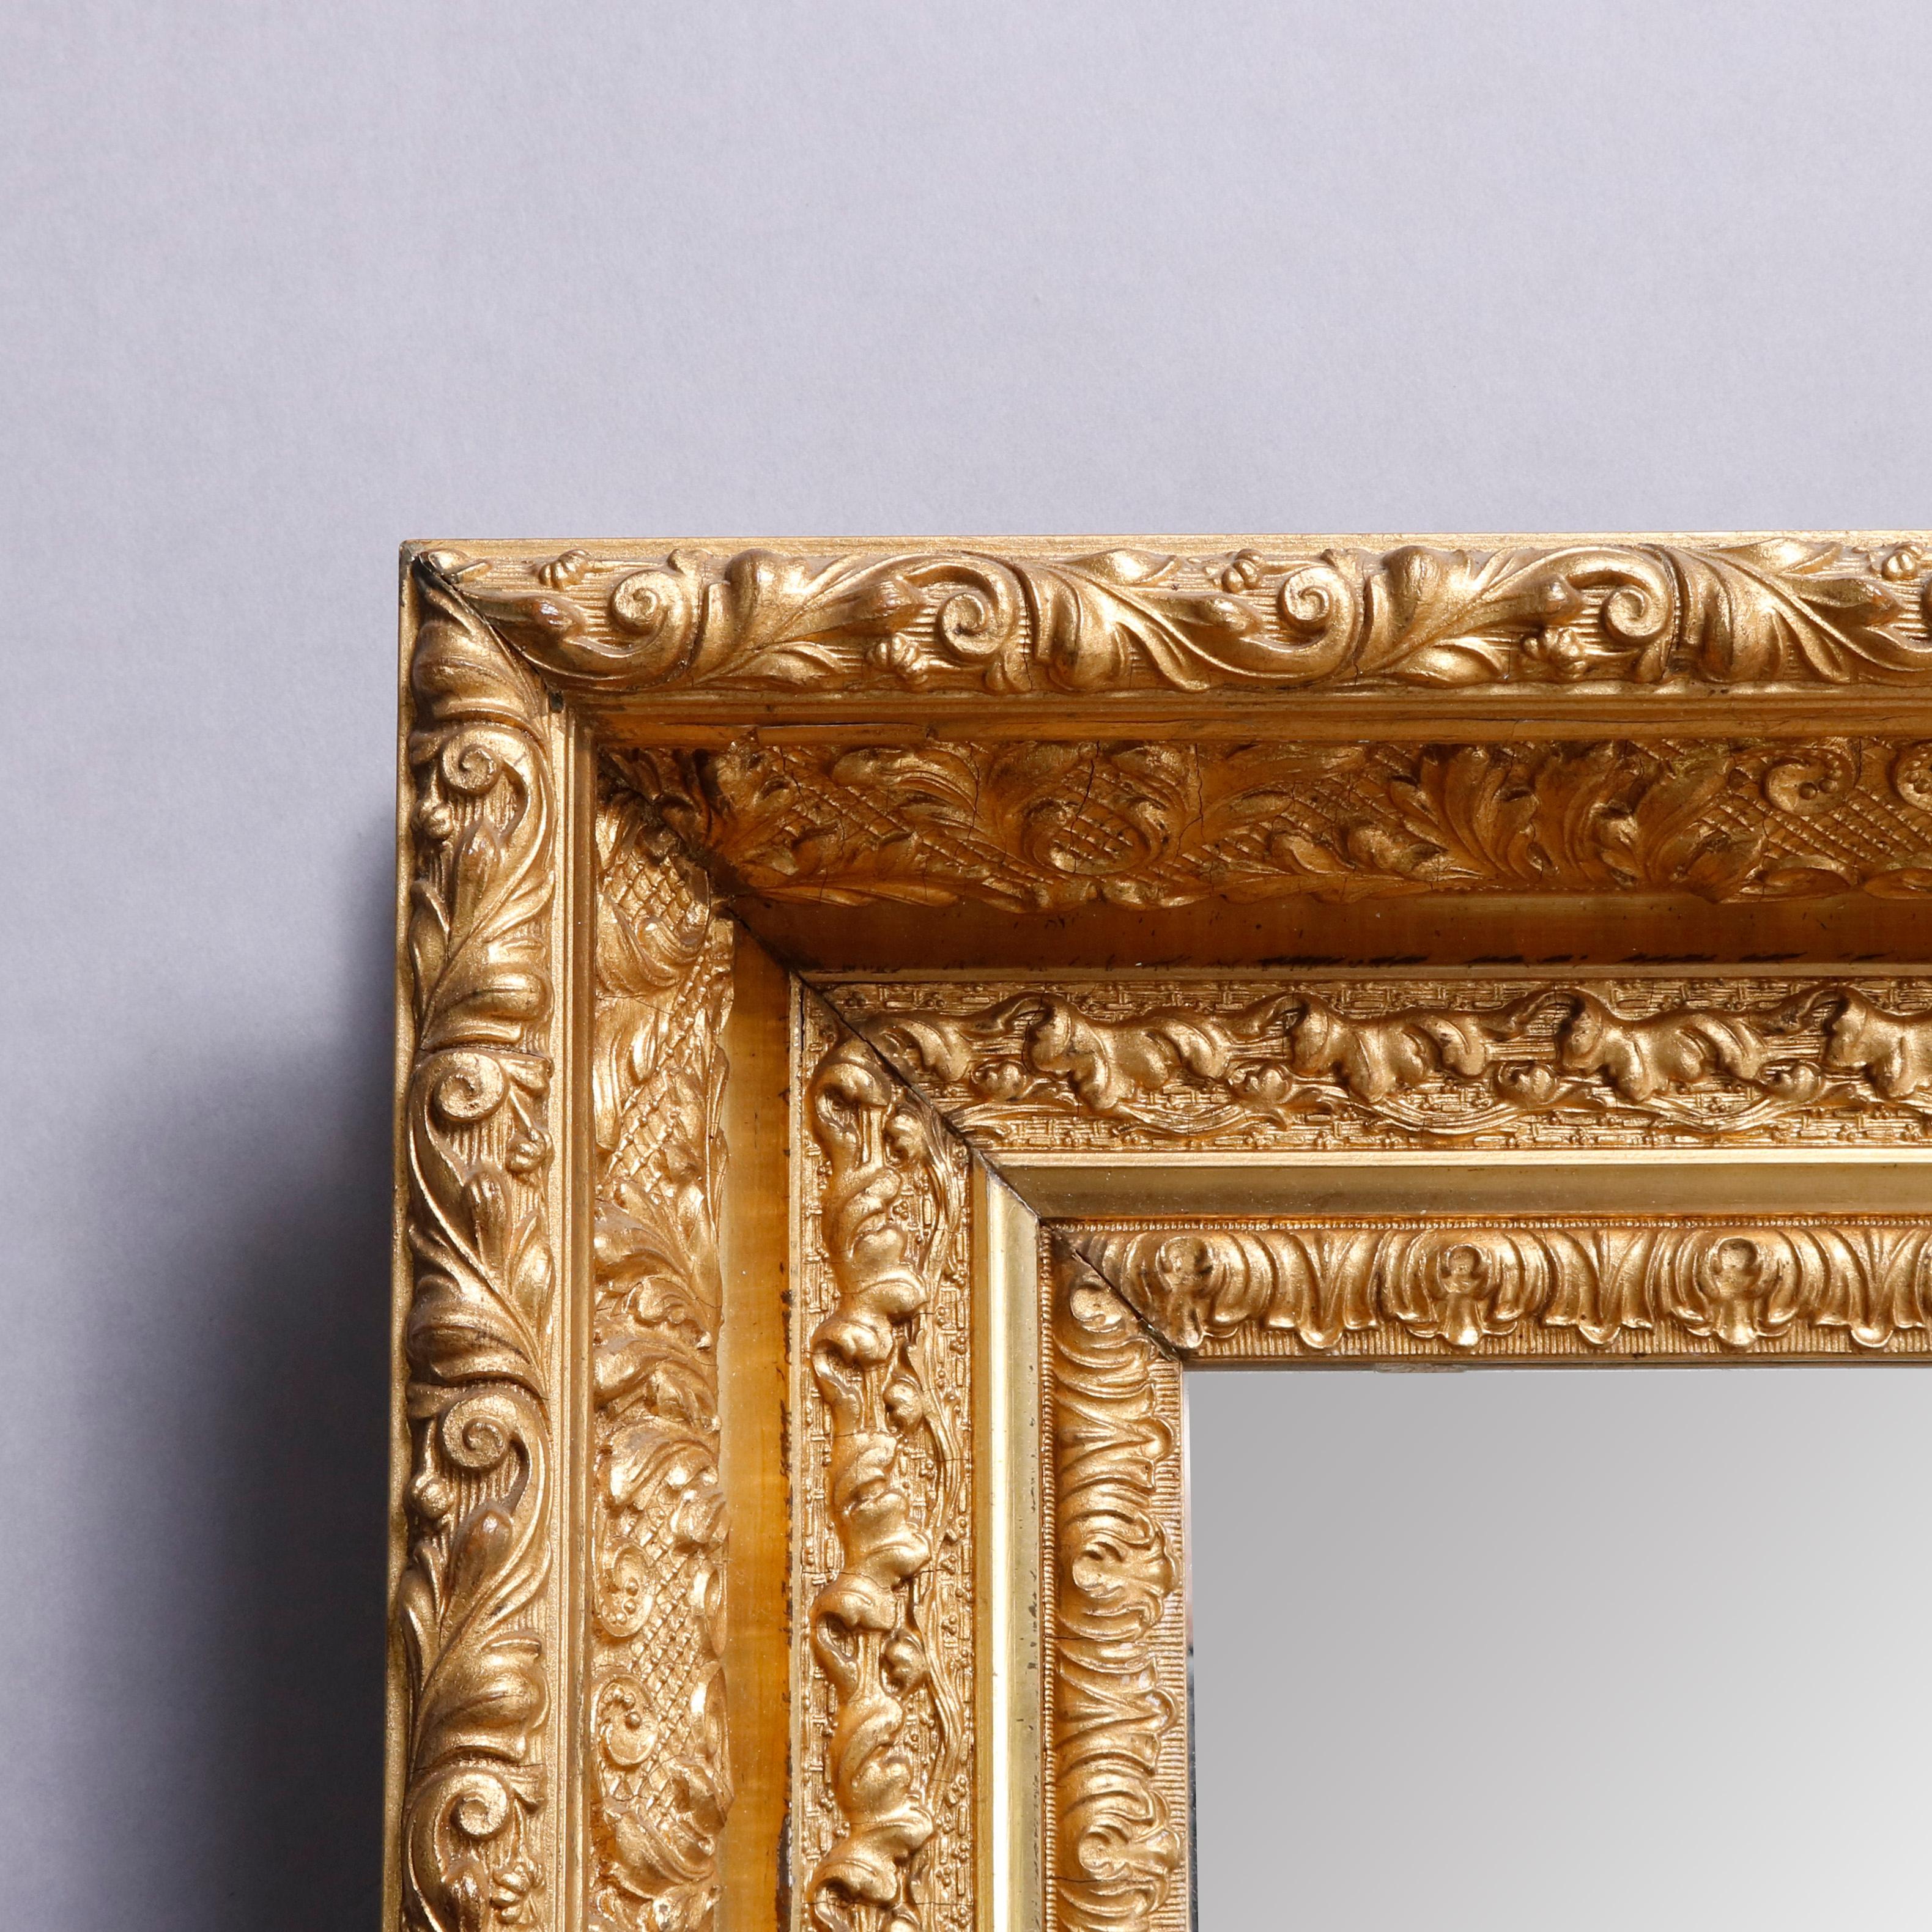 An antique French giltwood framed wall mirror offers scroll and foliate surround, 20th century


Measures: 27.5